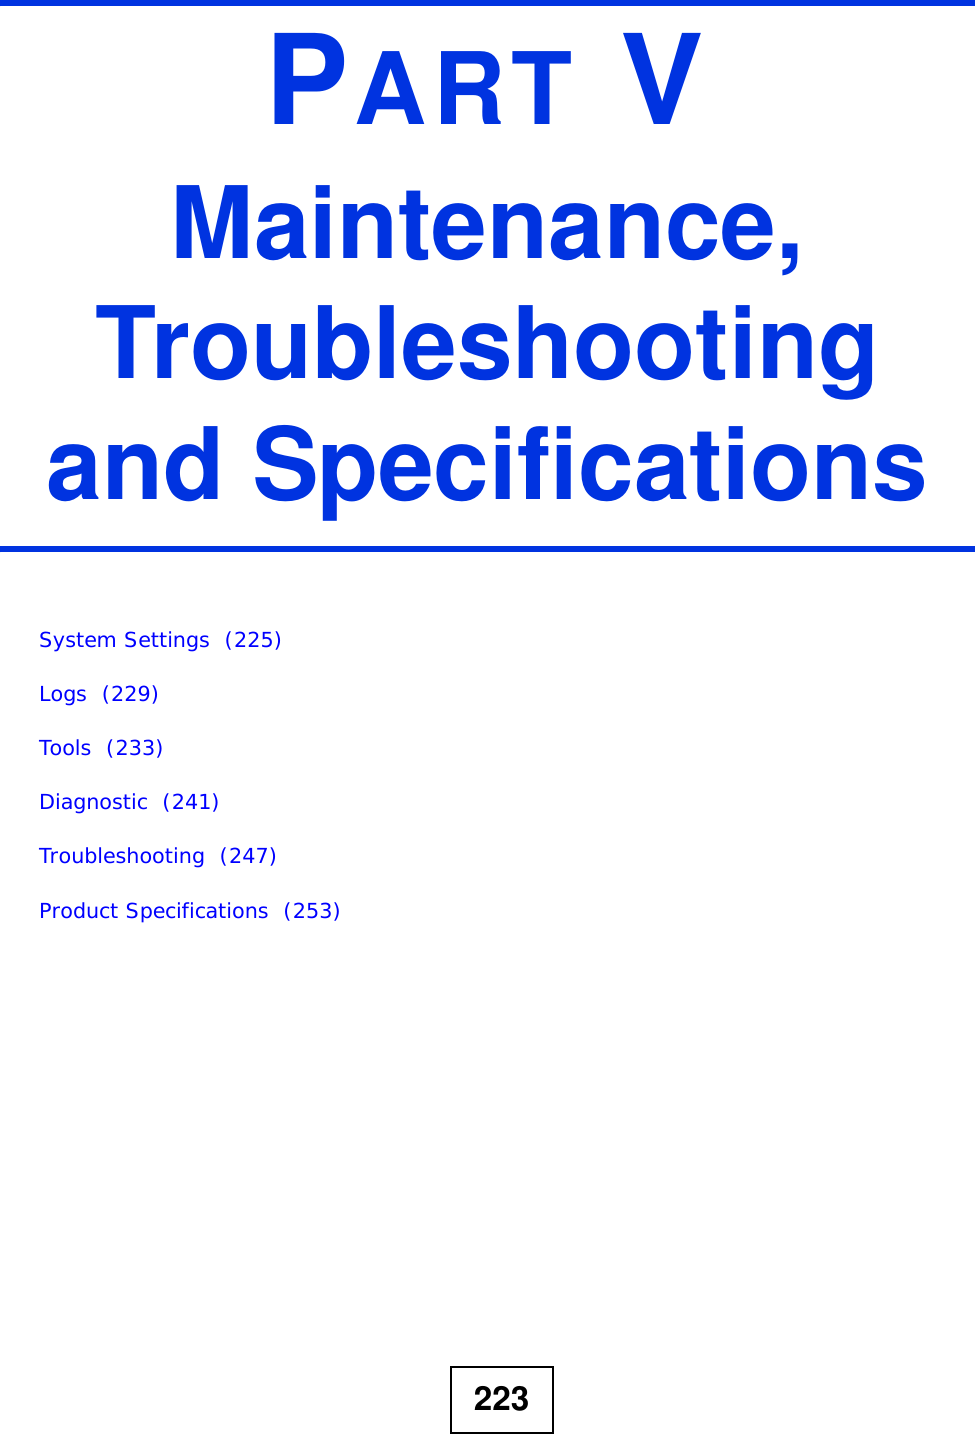 223PART VMaintenance, Troubleshooting and SpecificationsSystem Settings  (225)Logs  (229)Tools  (233)Diagnostic  (241)Troubleshooting  (247)Product Specifications  (253)